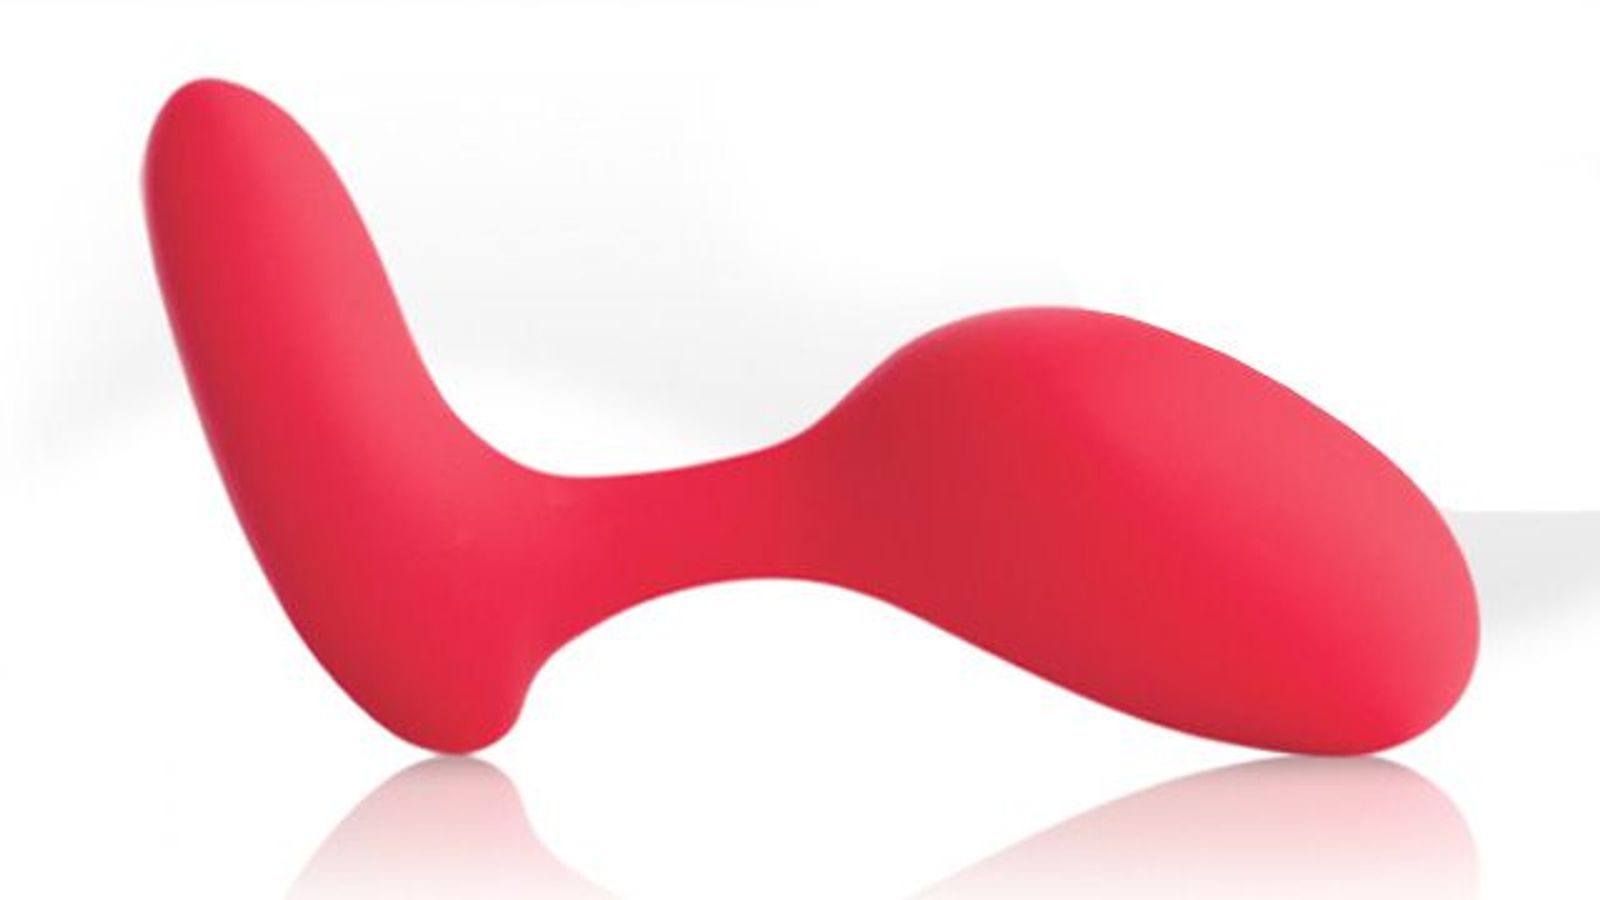 Entrenue Named Exclusive Distributor of Innovative Kegel Toy ‘Evi’ by Aneros